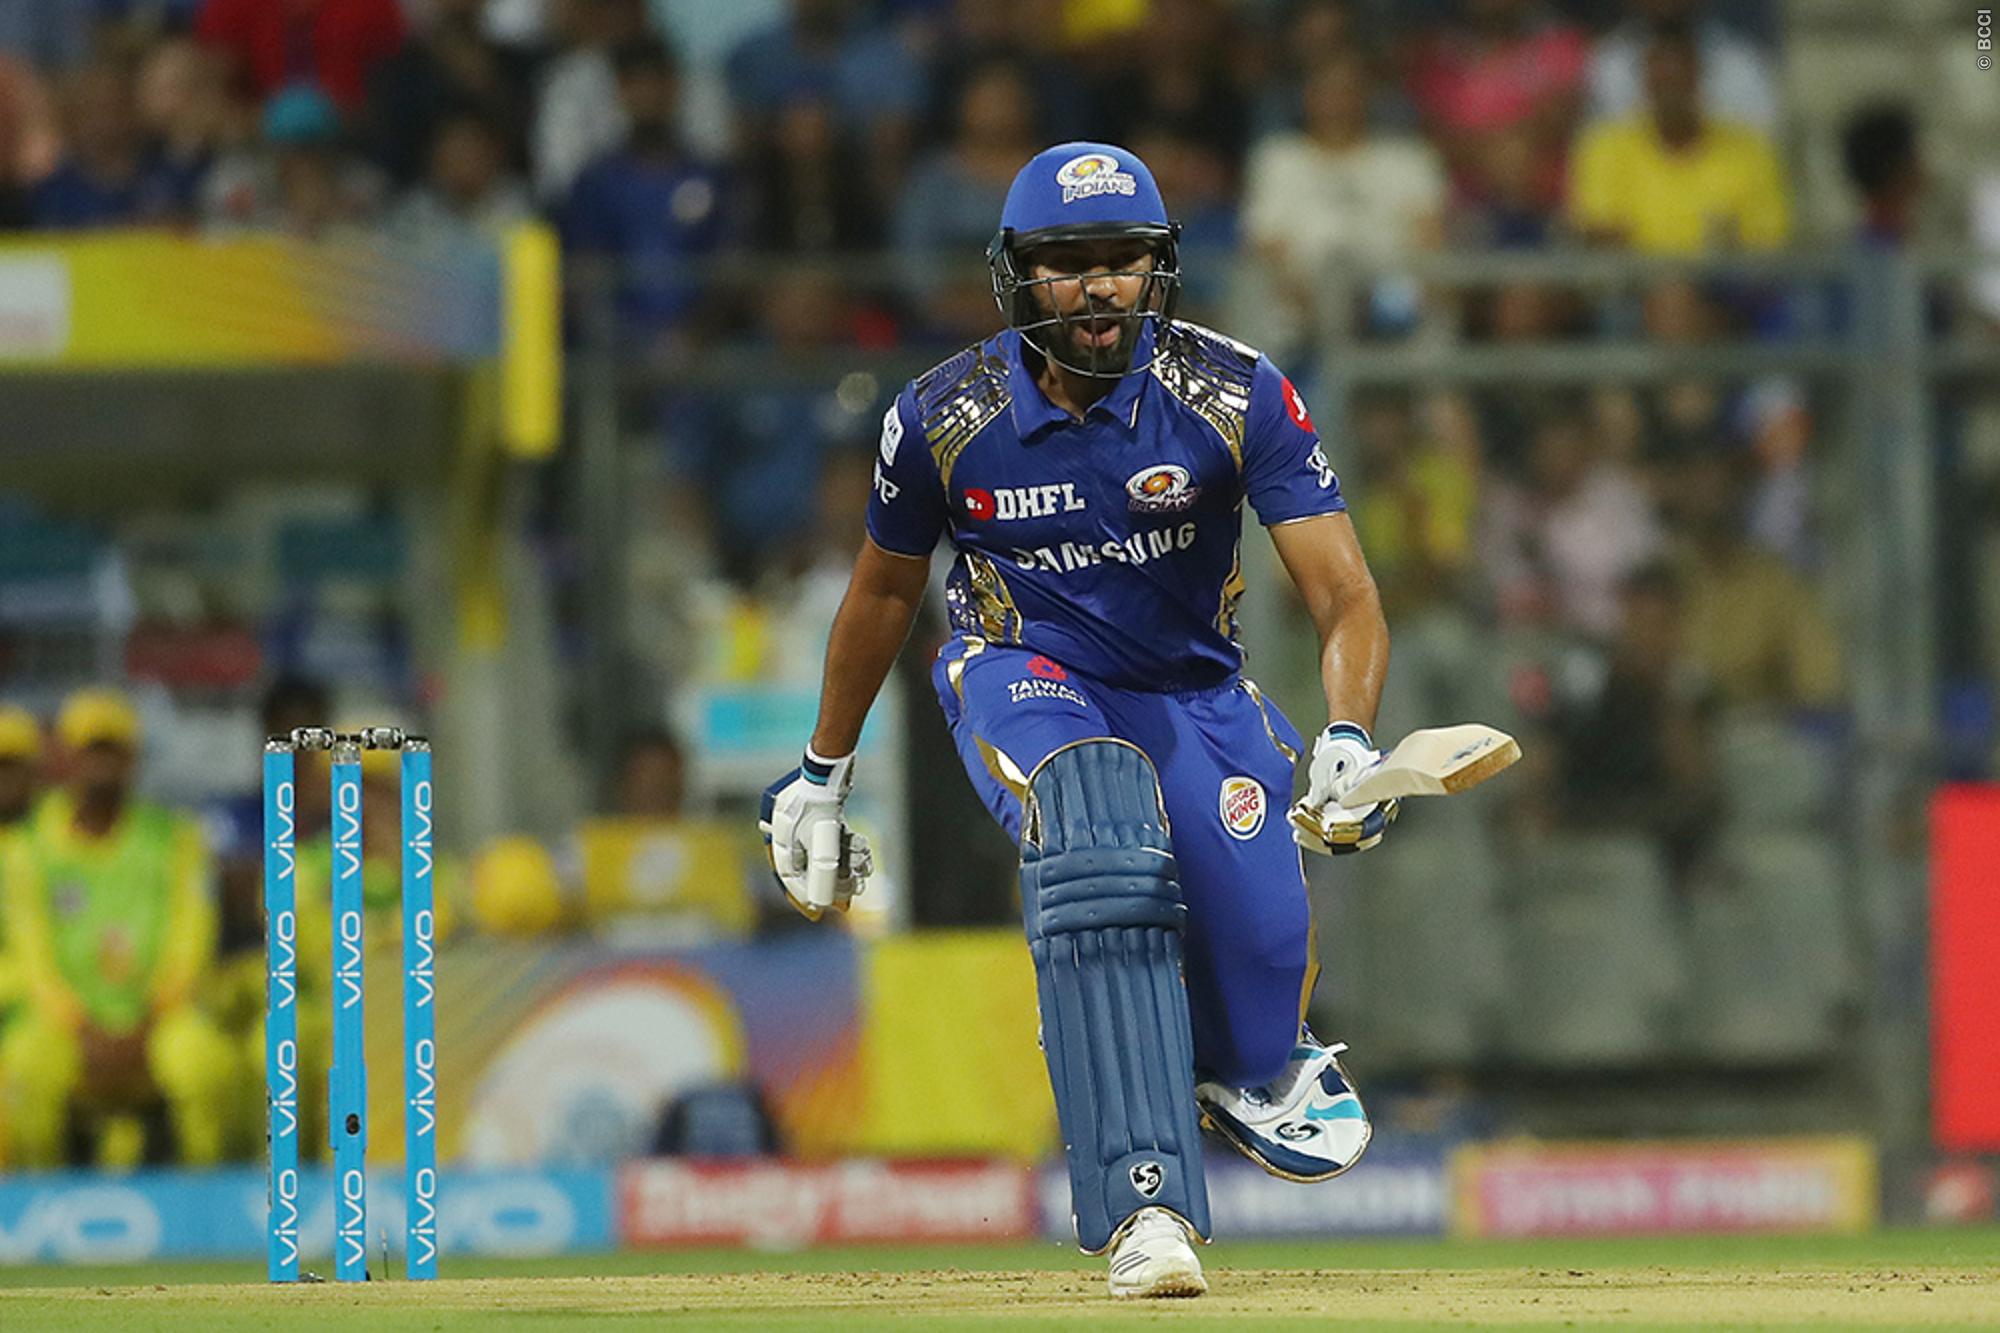 'Nice of Rohit Sharma to join us' - Rajasthan Royals hilariously refers team member as Mumbai Indians captain 